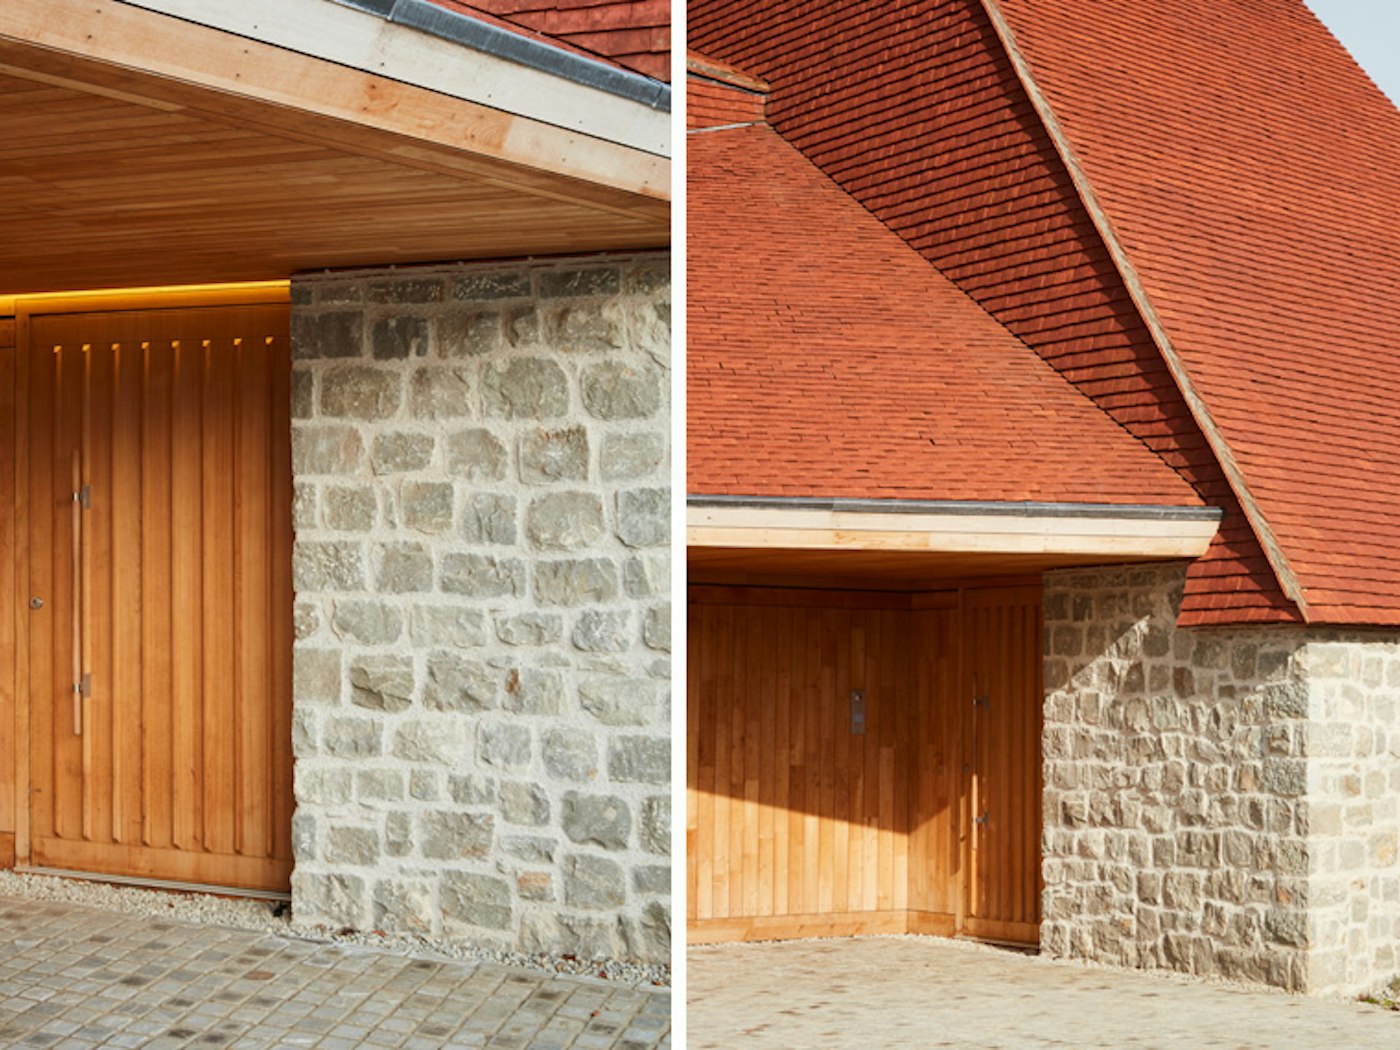 Urban front worked alongside the architects ensuring the doors would not stand out too much